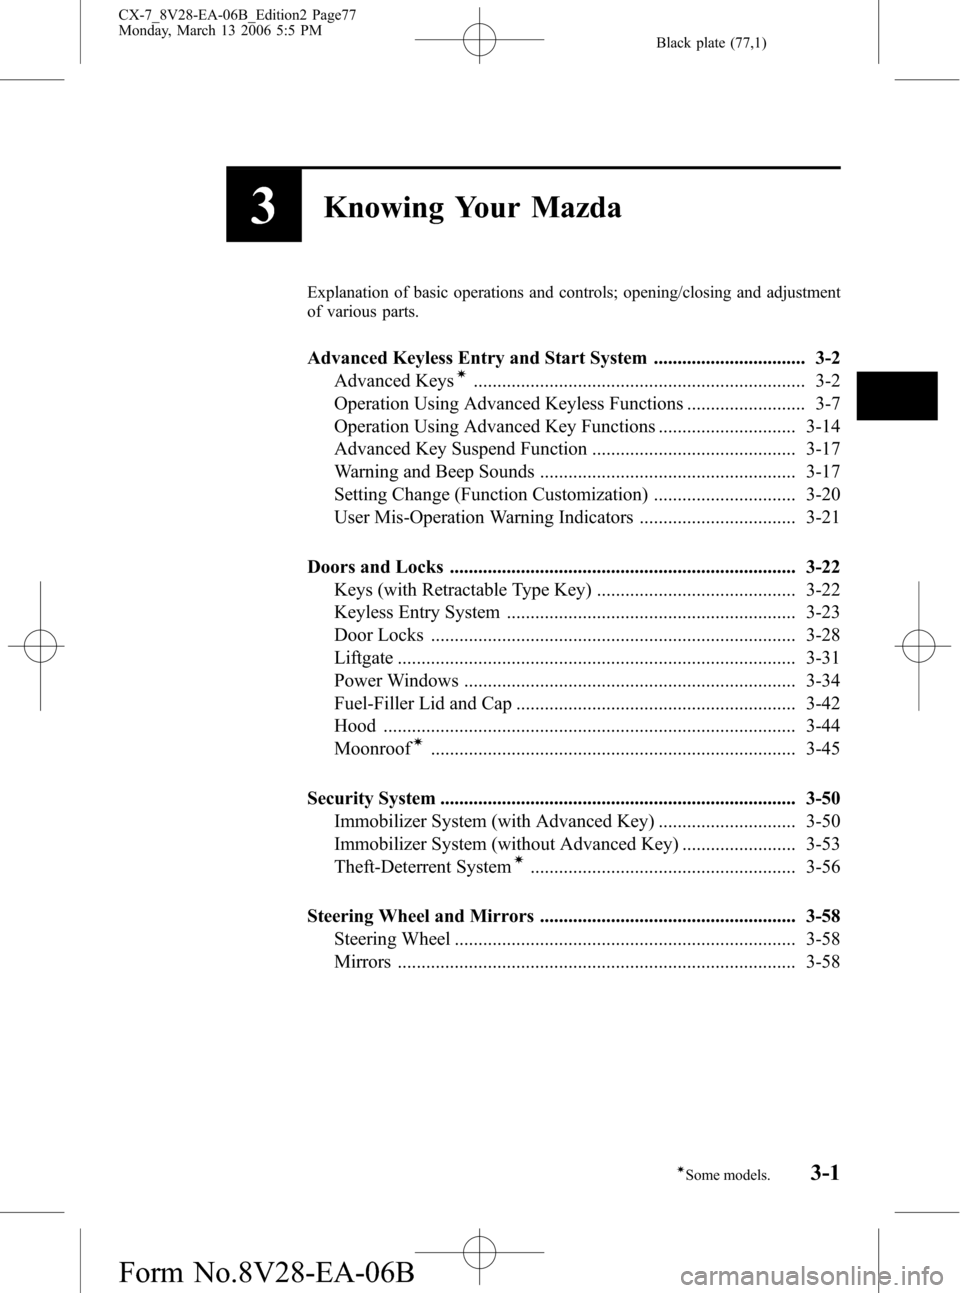 MAZDA MODEL CX-7 2007  Owners Manual (in English) Black plate (77,1)
3Knowing Your Mazda
Explanation of basic operations and controls; opening/closing and adjustment
of various parts.
Advanced Keyless Entry and Start System ..........................